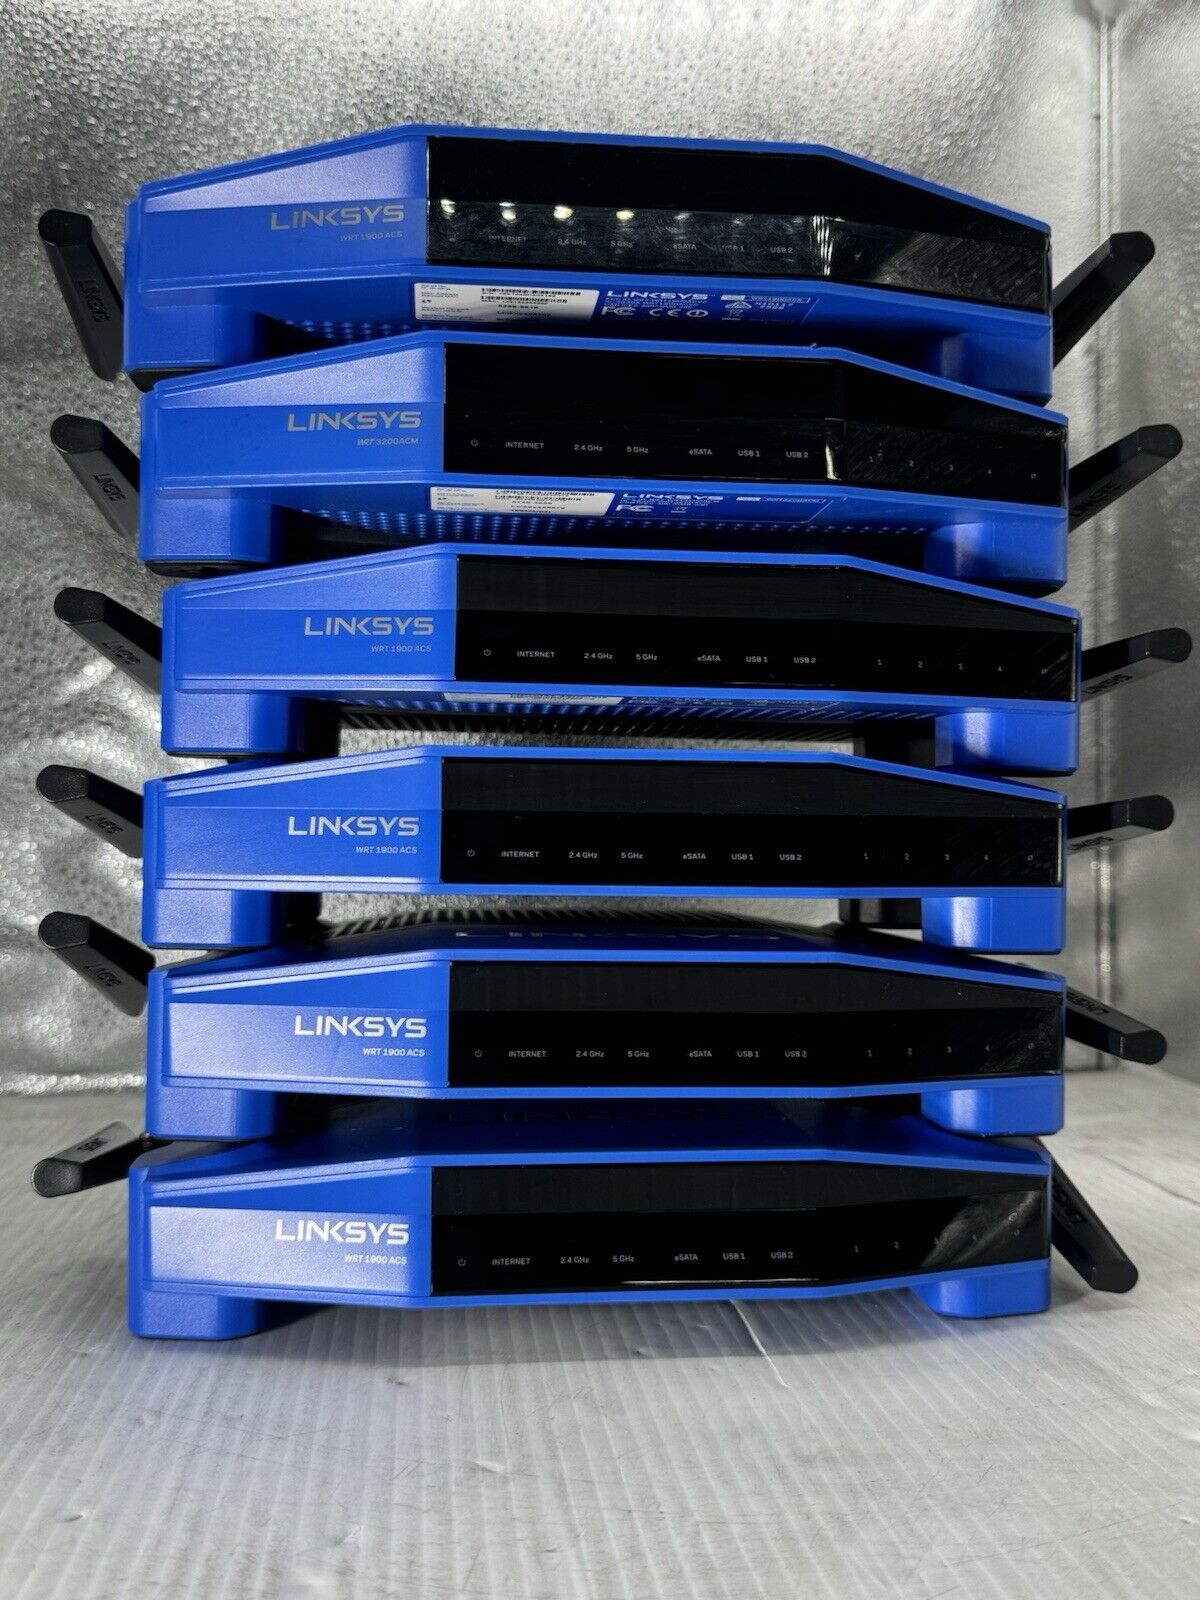 LOT OF 6 Linksys WRT 1900 ACS V2 Dual Band Ultra-Fast Wireless WiFi Router